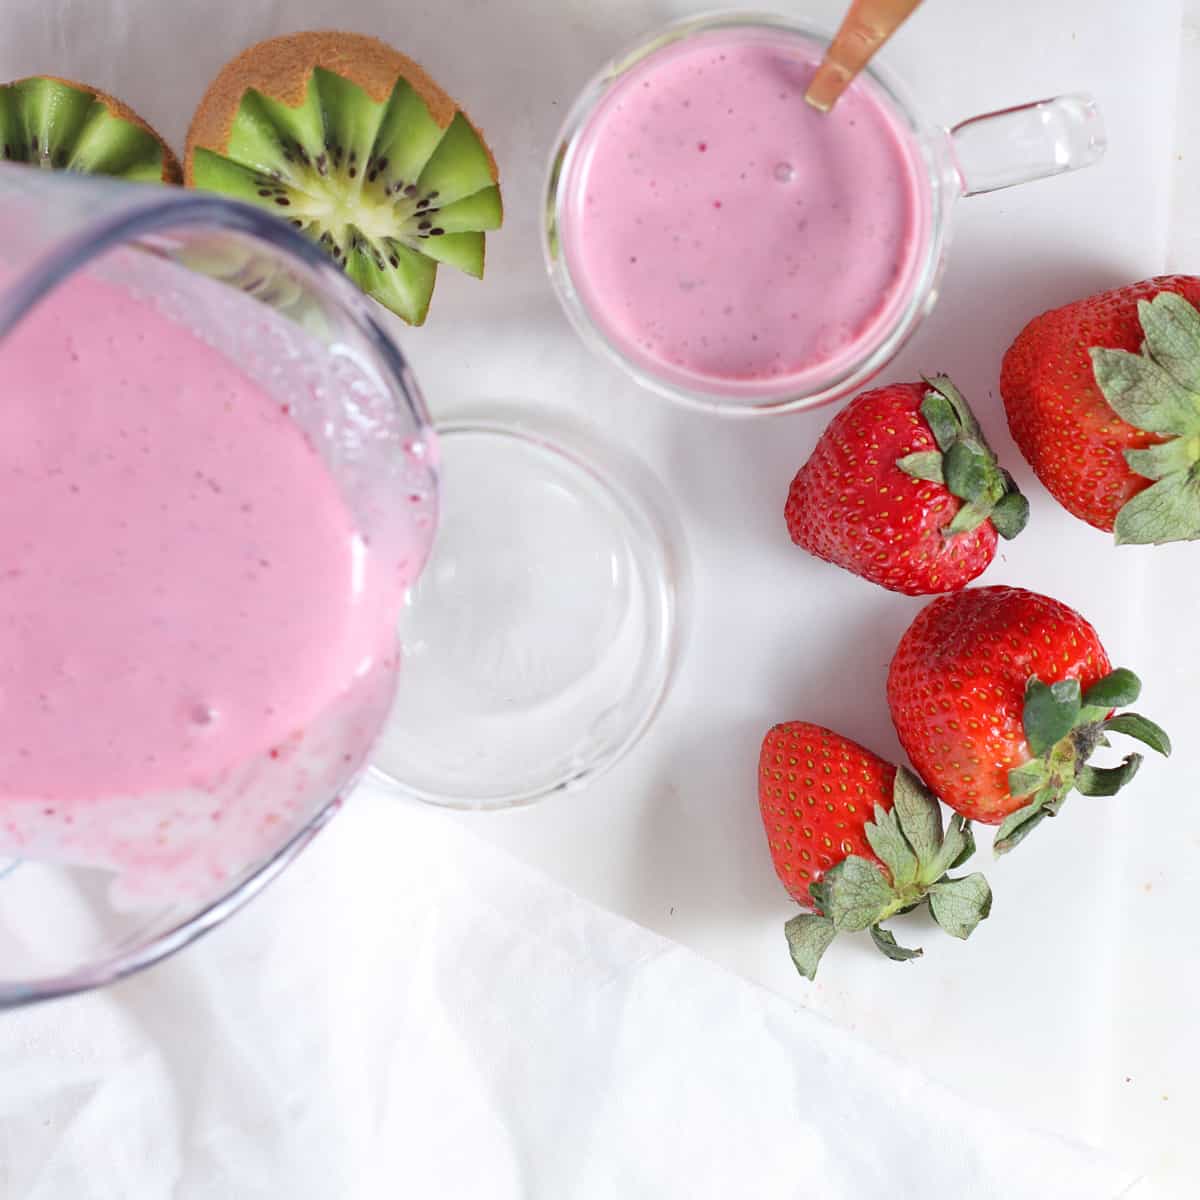 Making a Strawberry Smoothie